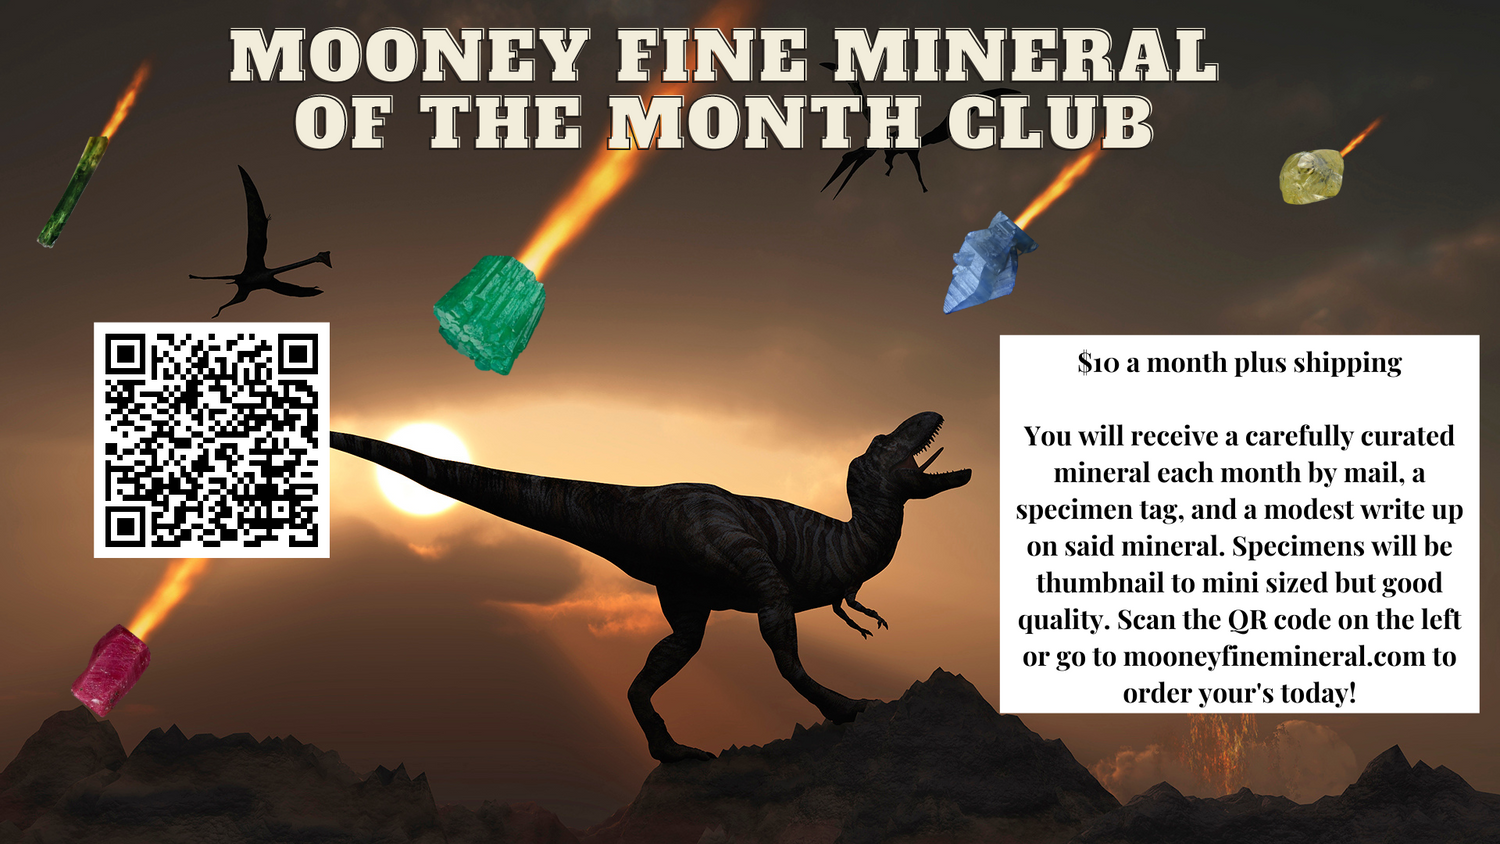 Mooney Fine Mineral of the Month Club